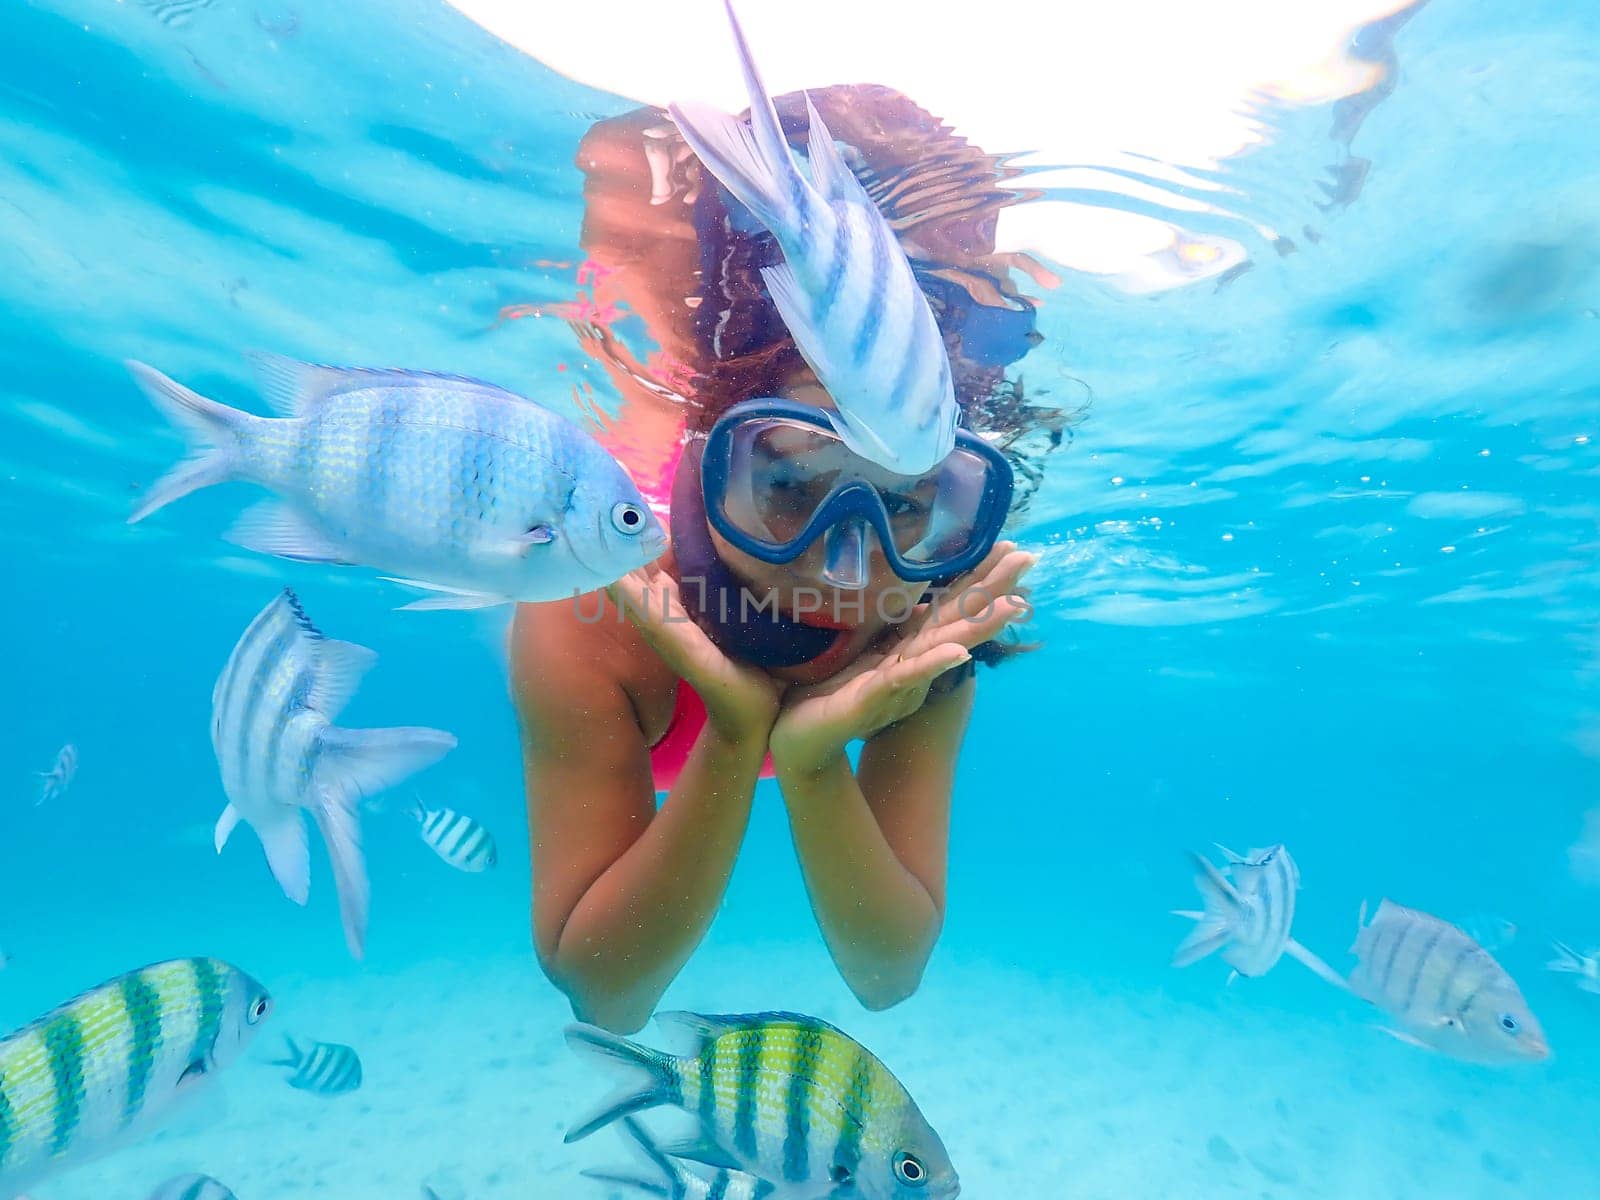 Asian woman on a snorkeling trip at Samaesan Thailand. dive underwater with Nemo Clown fishes in the coral reef sea pool.